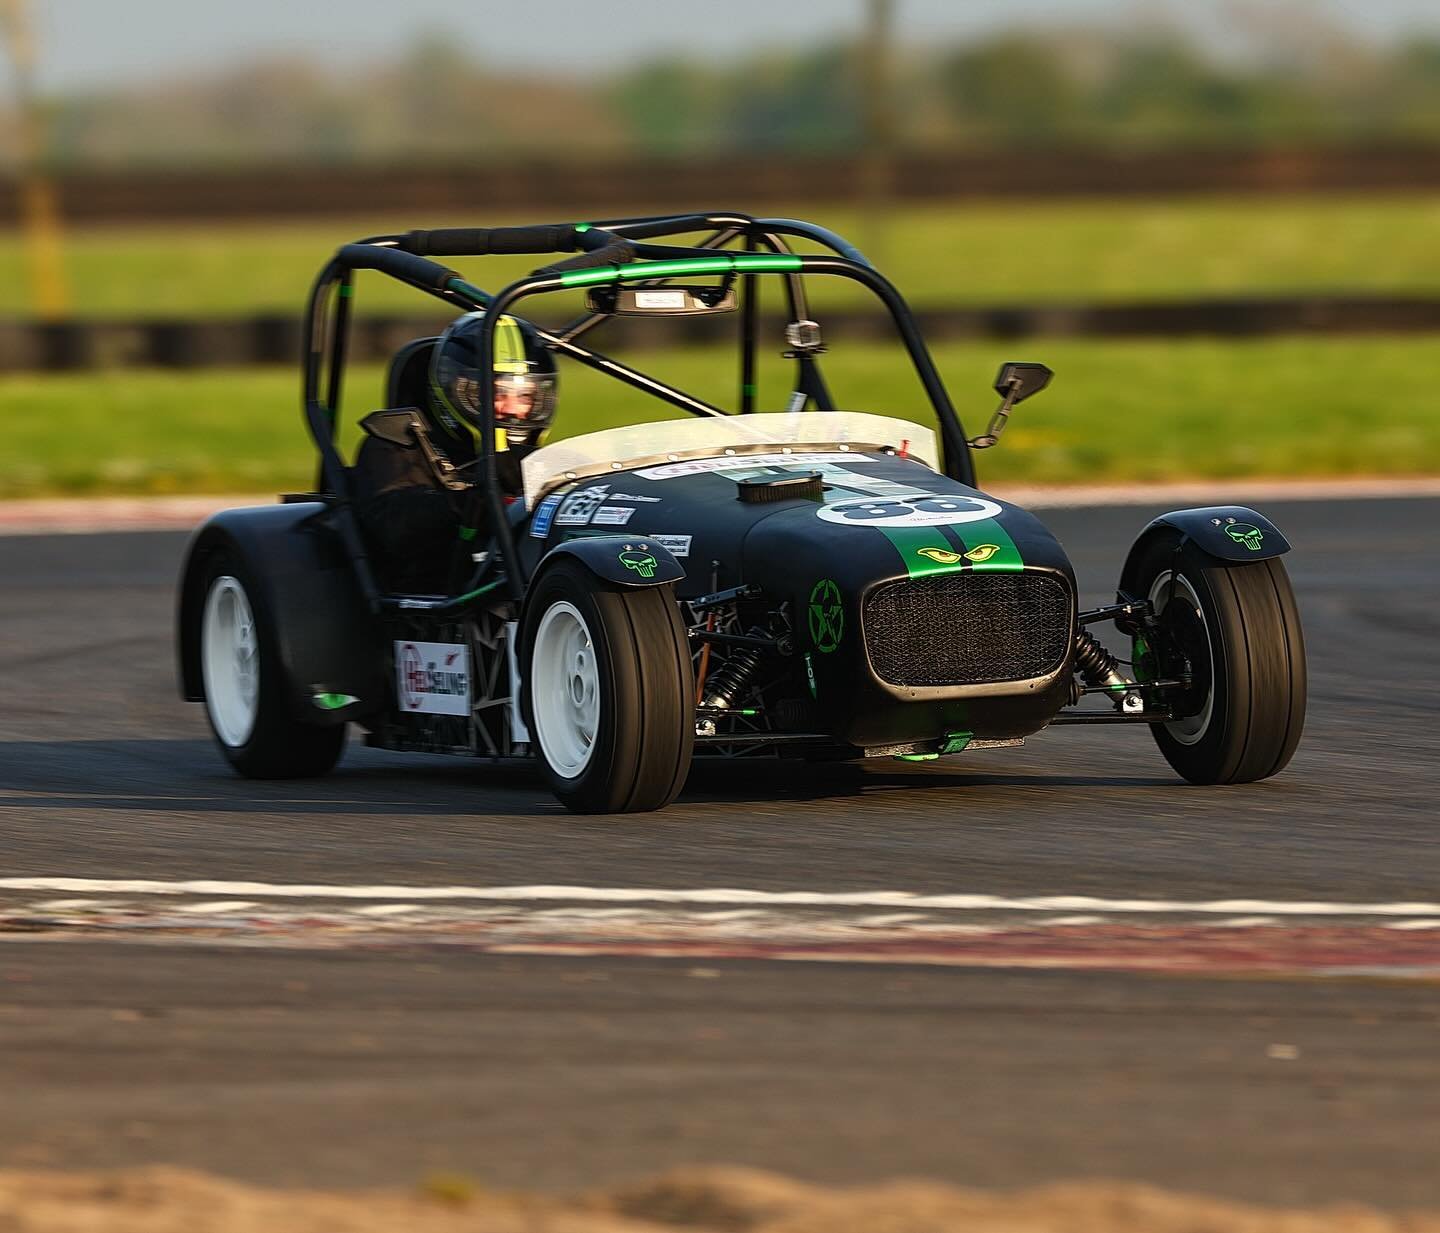 Introducing&hellip; &ldquo;Matilda&rdquo; 🏎️
A year in the making - now time to race!
- - - - - 
#racing
#goracing
#locost
#locost750mc 
#locost750
#750mc 
#locostchampionship 
#xflow 
#xflow1300 
#sevenracing_ 
#caterham
#helicopterpilotlife
#helis